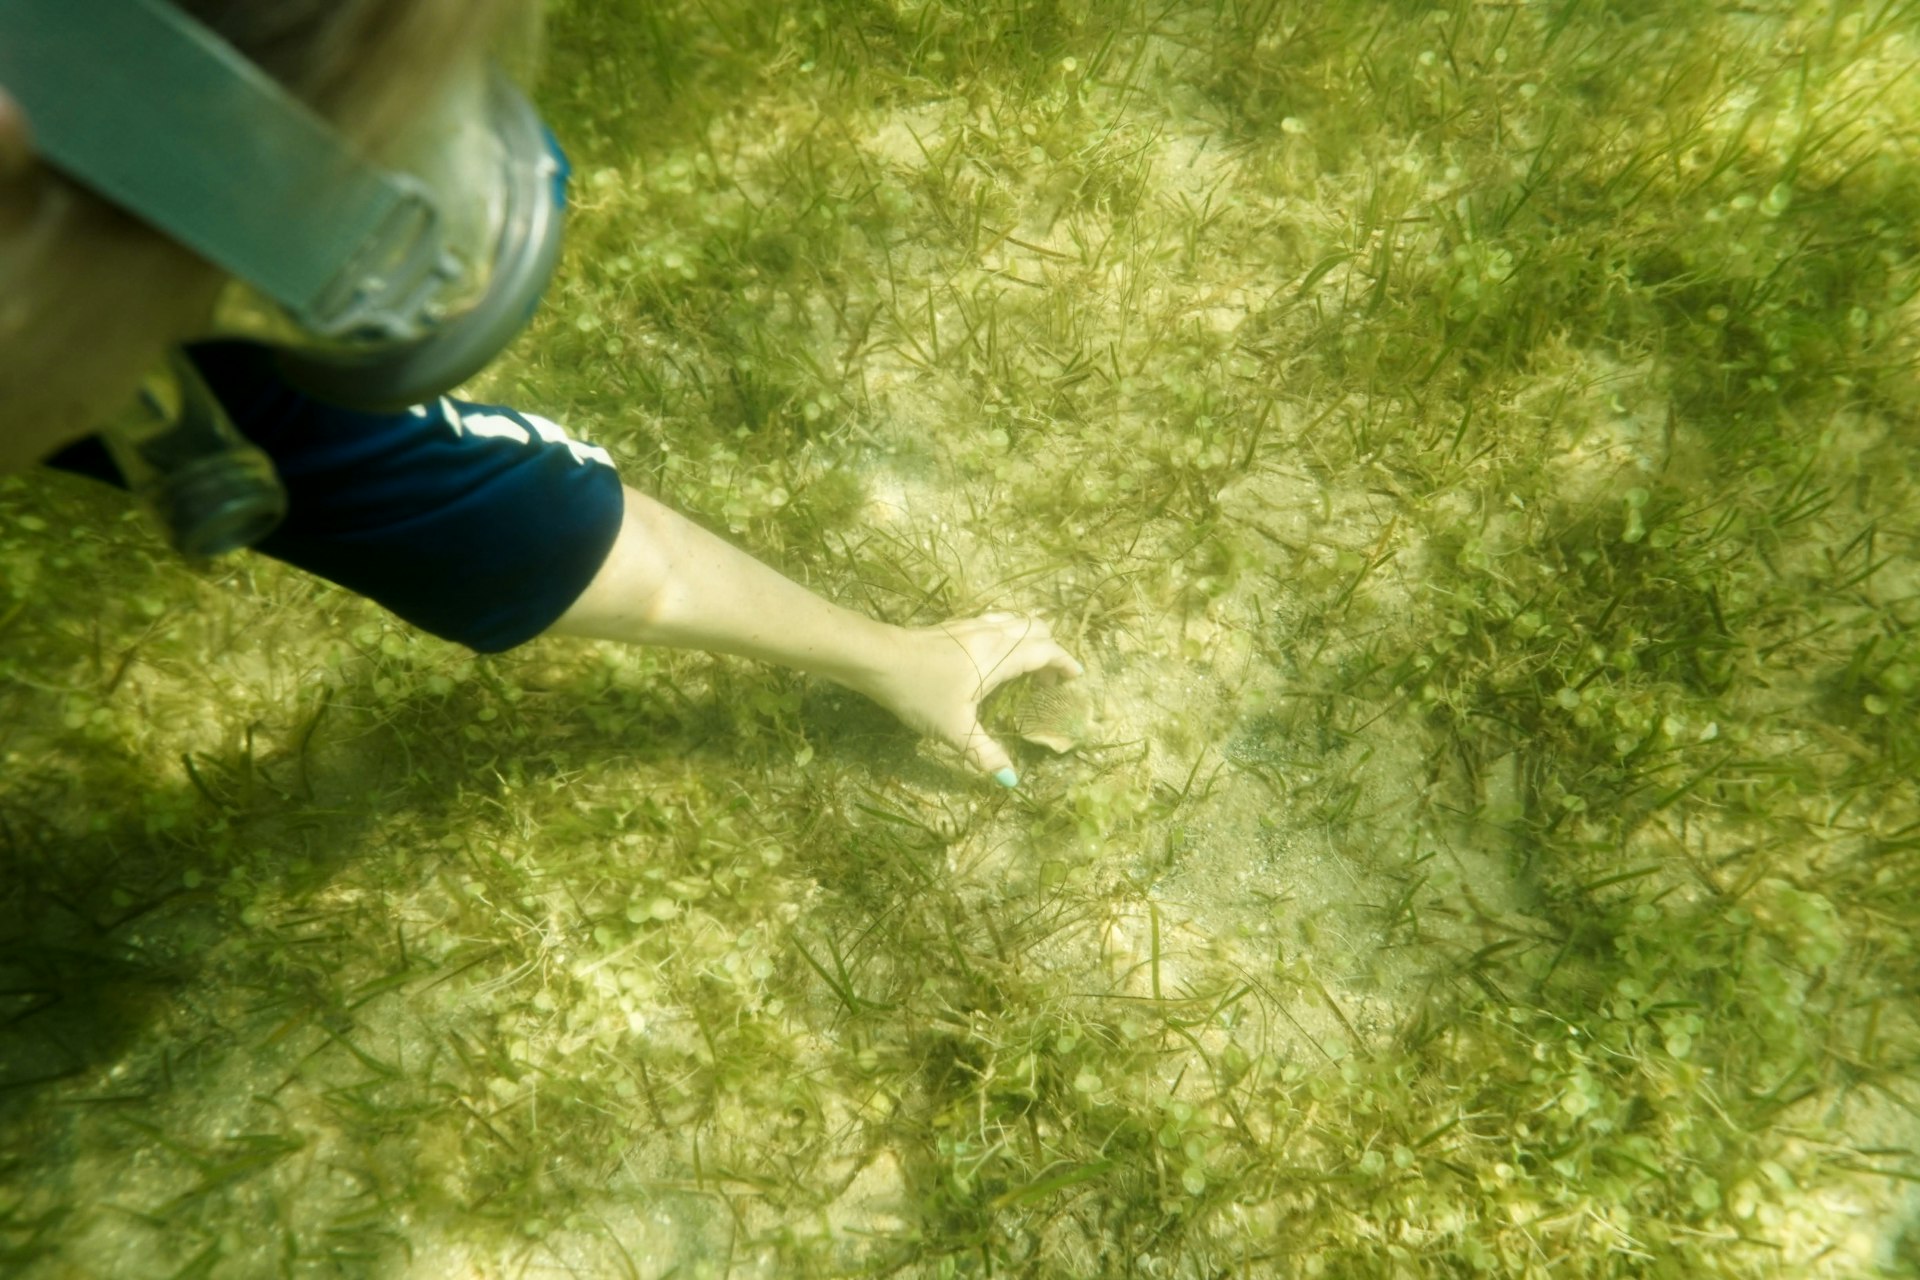 A female snorkeler reaches for a scallop among seagrass